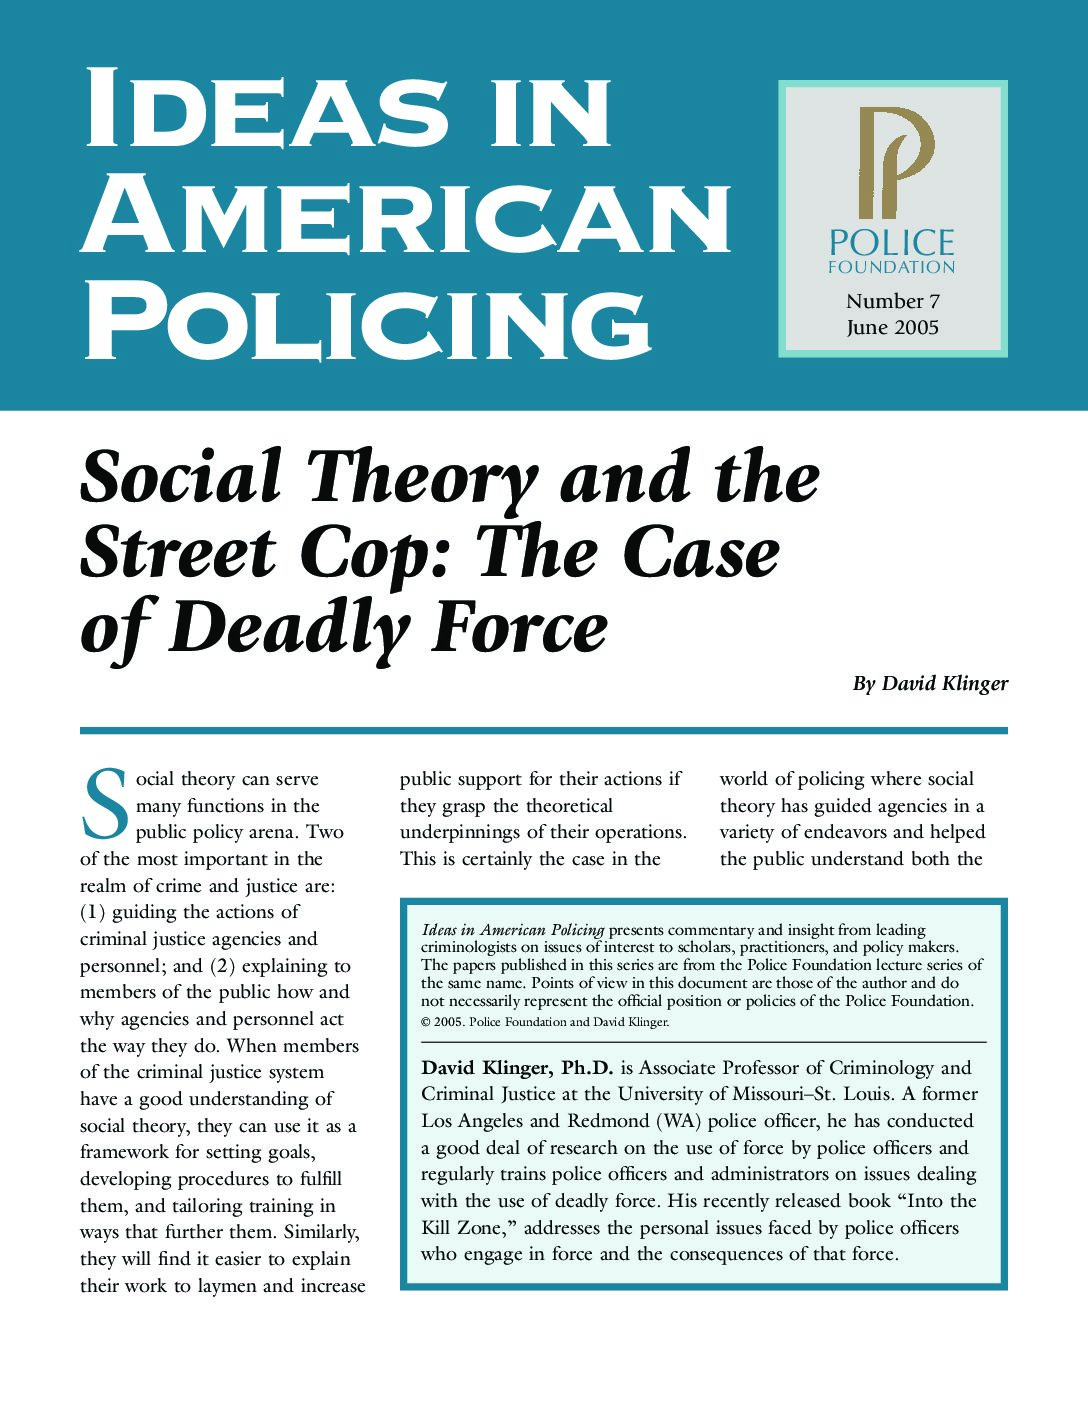 Klinger-2005-Social-Theory-and-the-Street-Cop-pdf